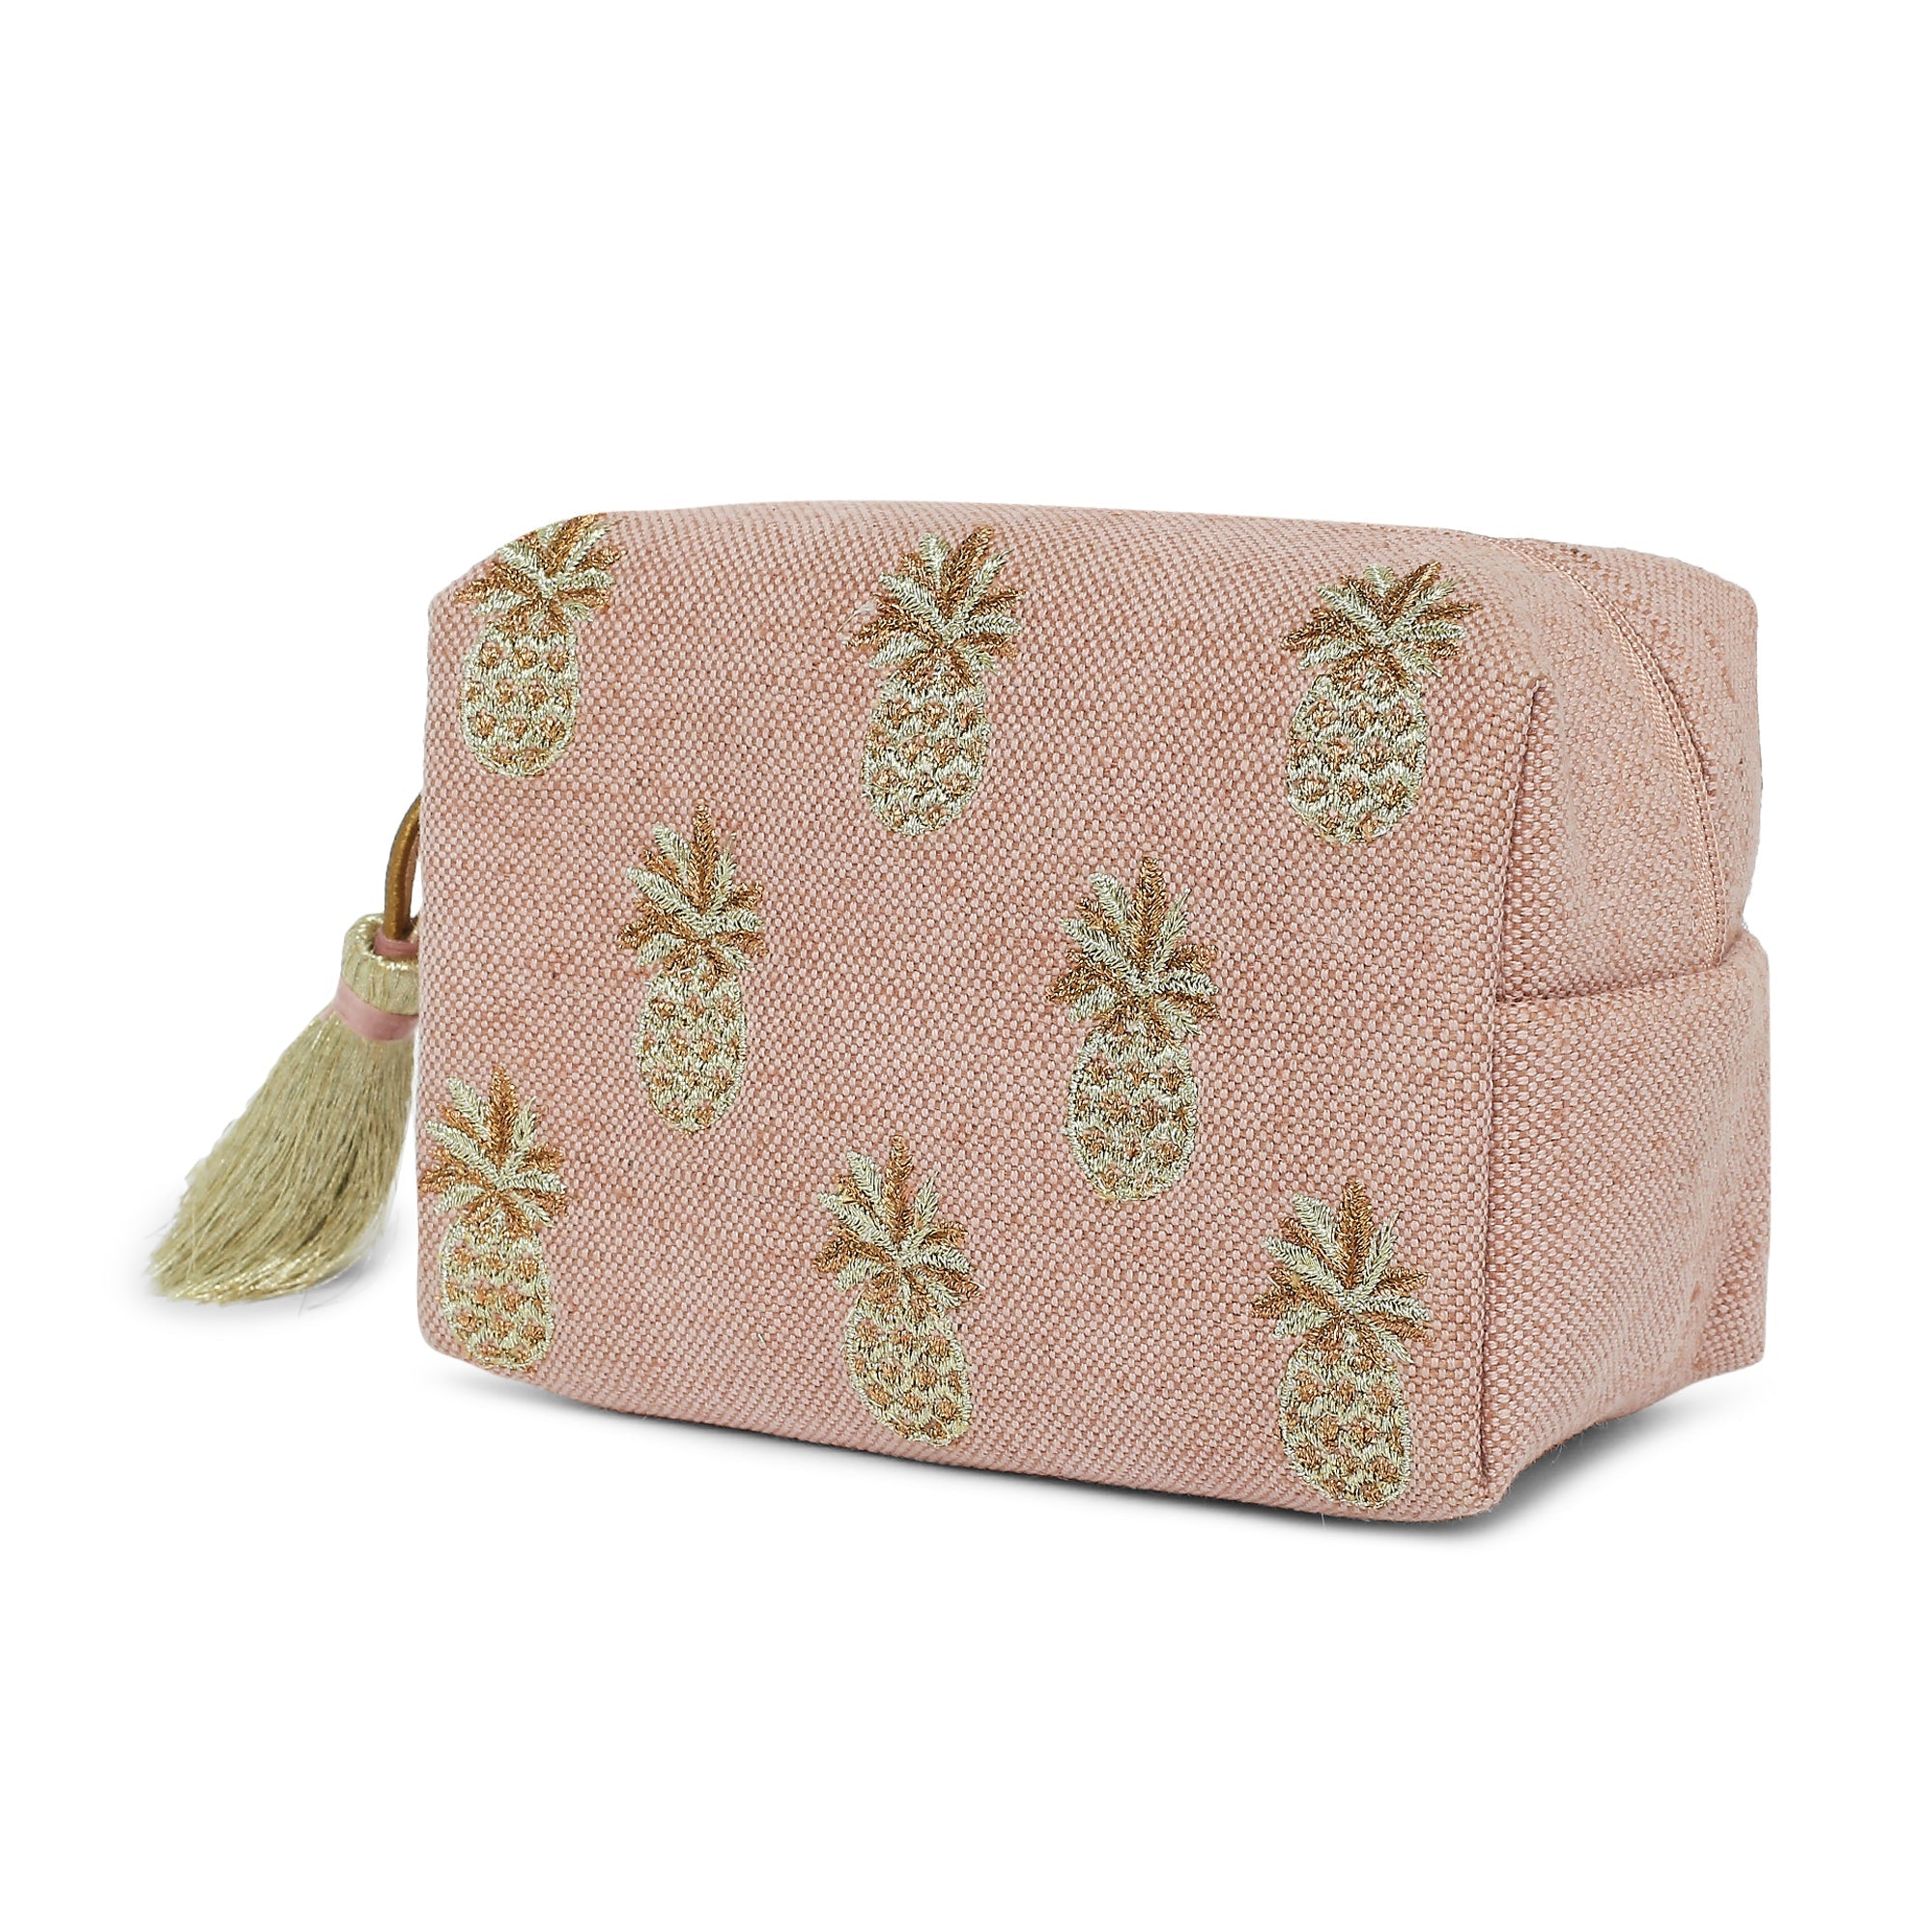 Accessorize London Pouch : Buy Accessorize London Women's Faux Leather  Natural Polly Pineapple Makeup Bag / Natural Online